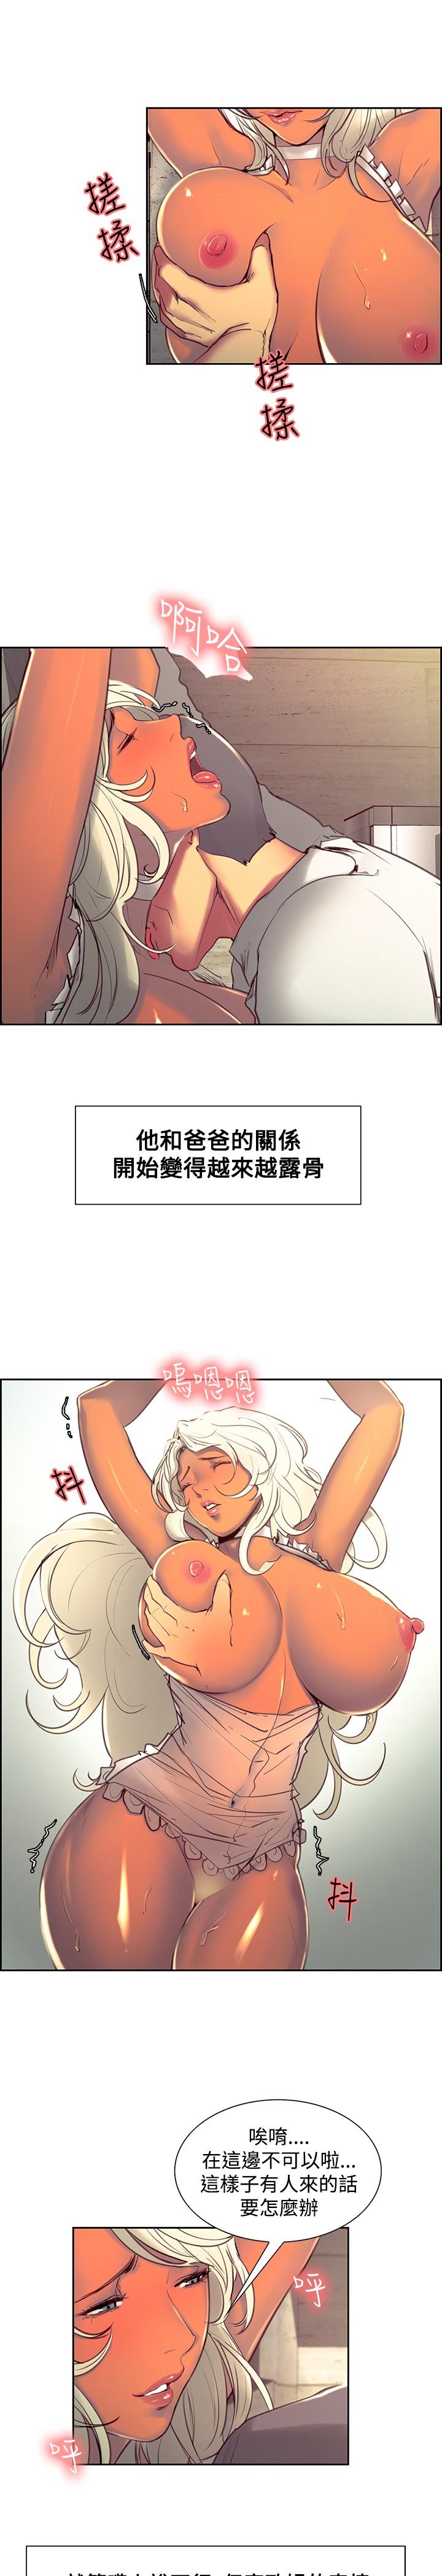 [Serious] Domesticate the Housekeeper 调教家政妇 Ch.29~44END [Chinese]中文 38